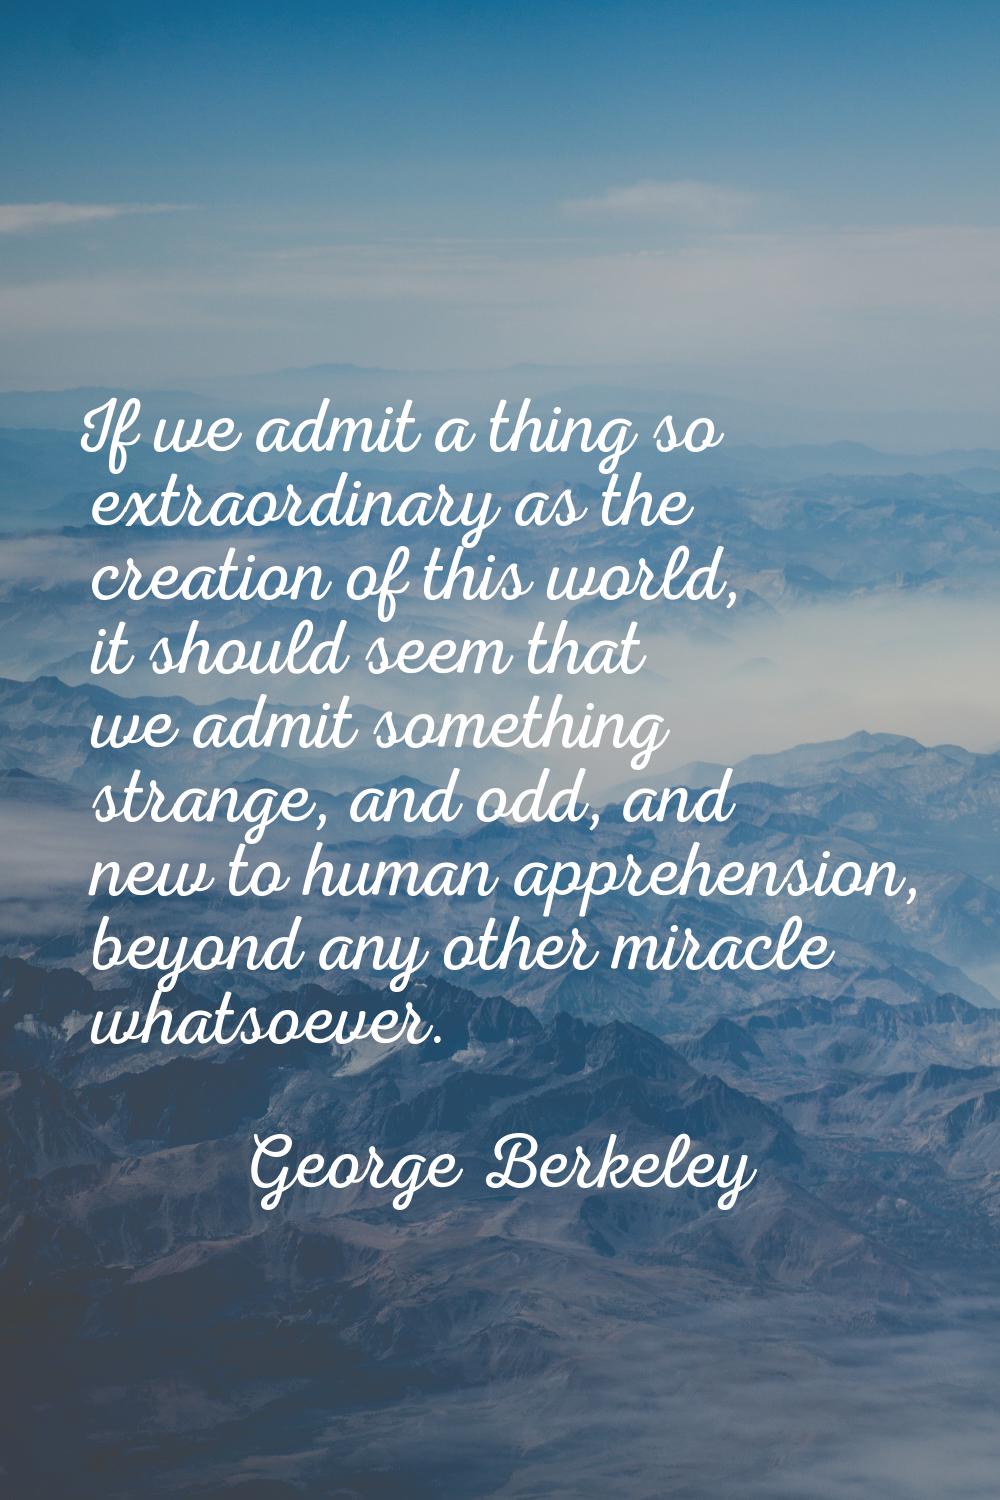 If we admit a thing so extraordinary as the creation of this world, it should seem that we admit so